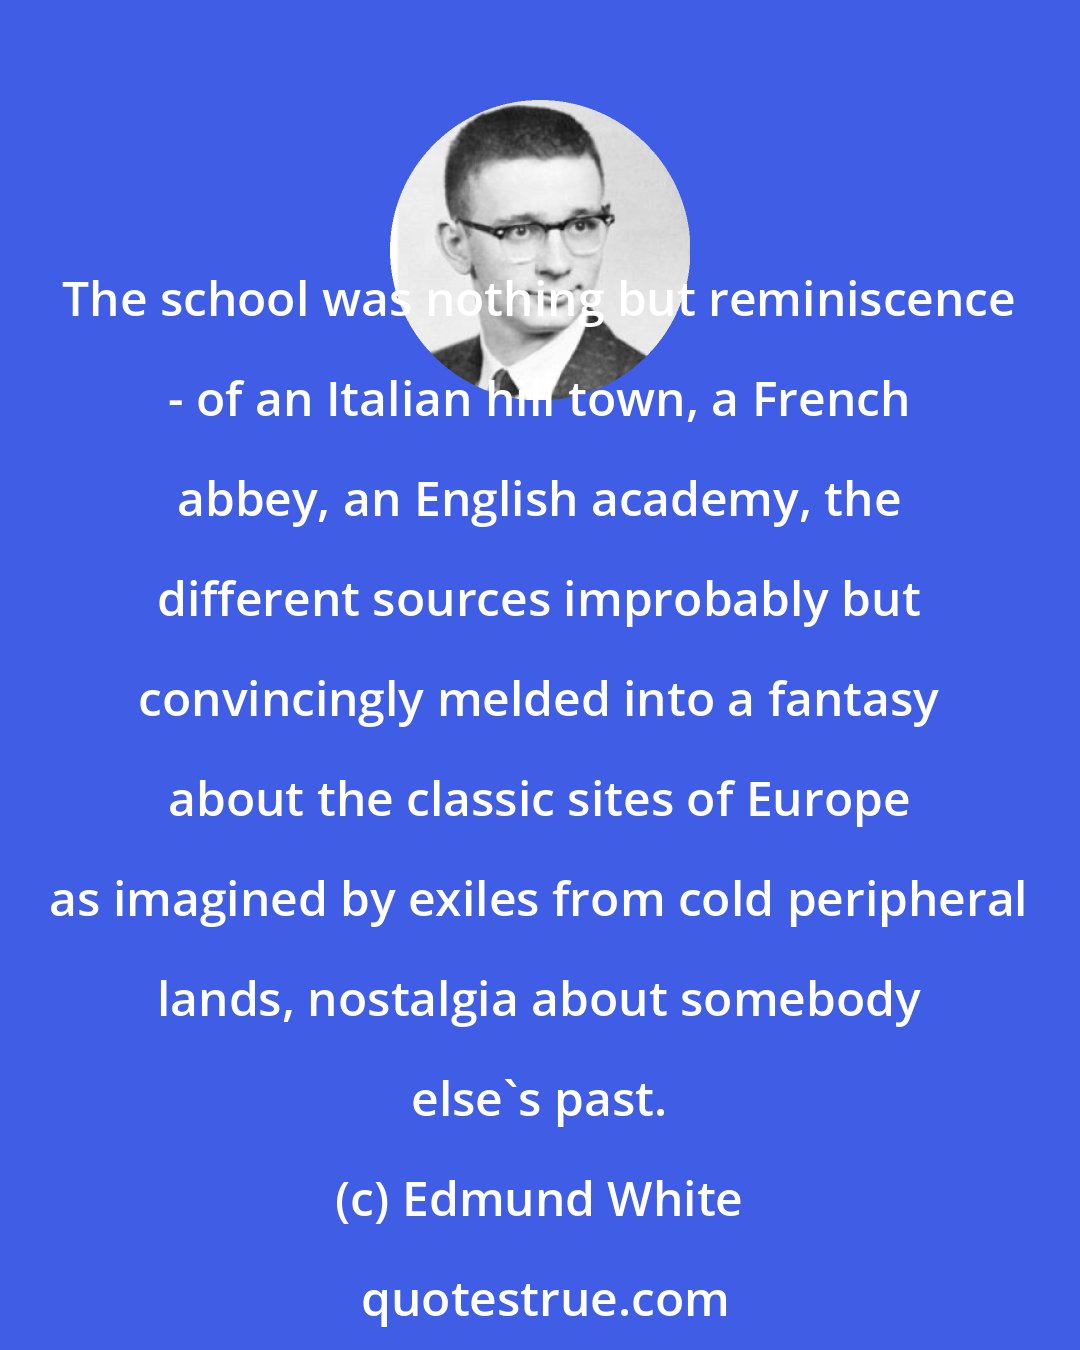 Edmund White: The school was nothing but reminiscence - of an Italian hill town, a French abbey, an English academy, the different sources improbably but convincingly melded into a fantasy about the classic sites of Europe as imagined by exiles from cold peripheral lands, nostalgia about somebody else's past.